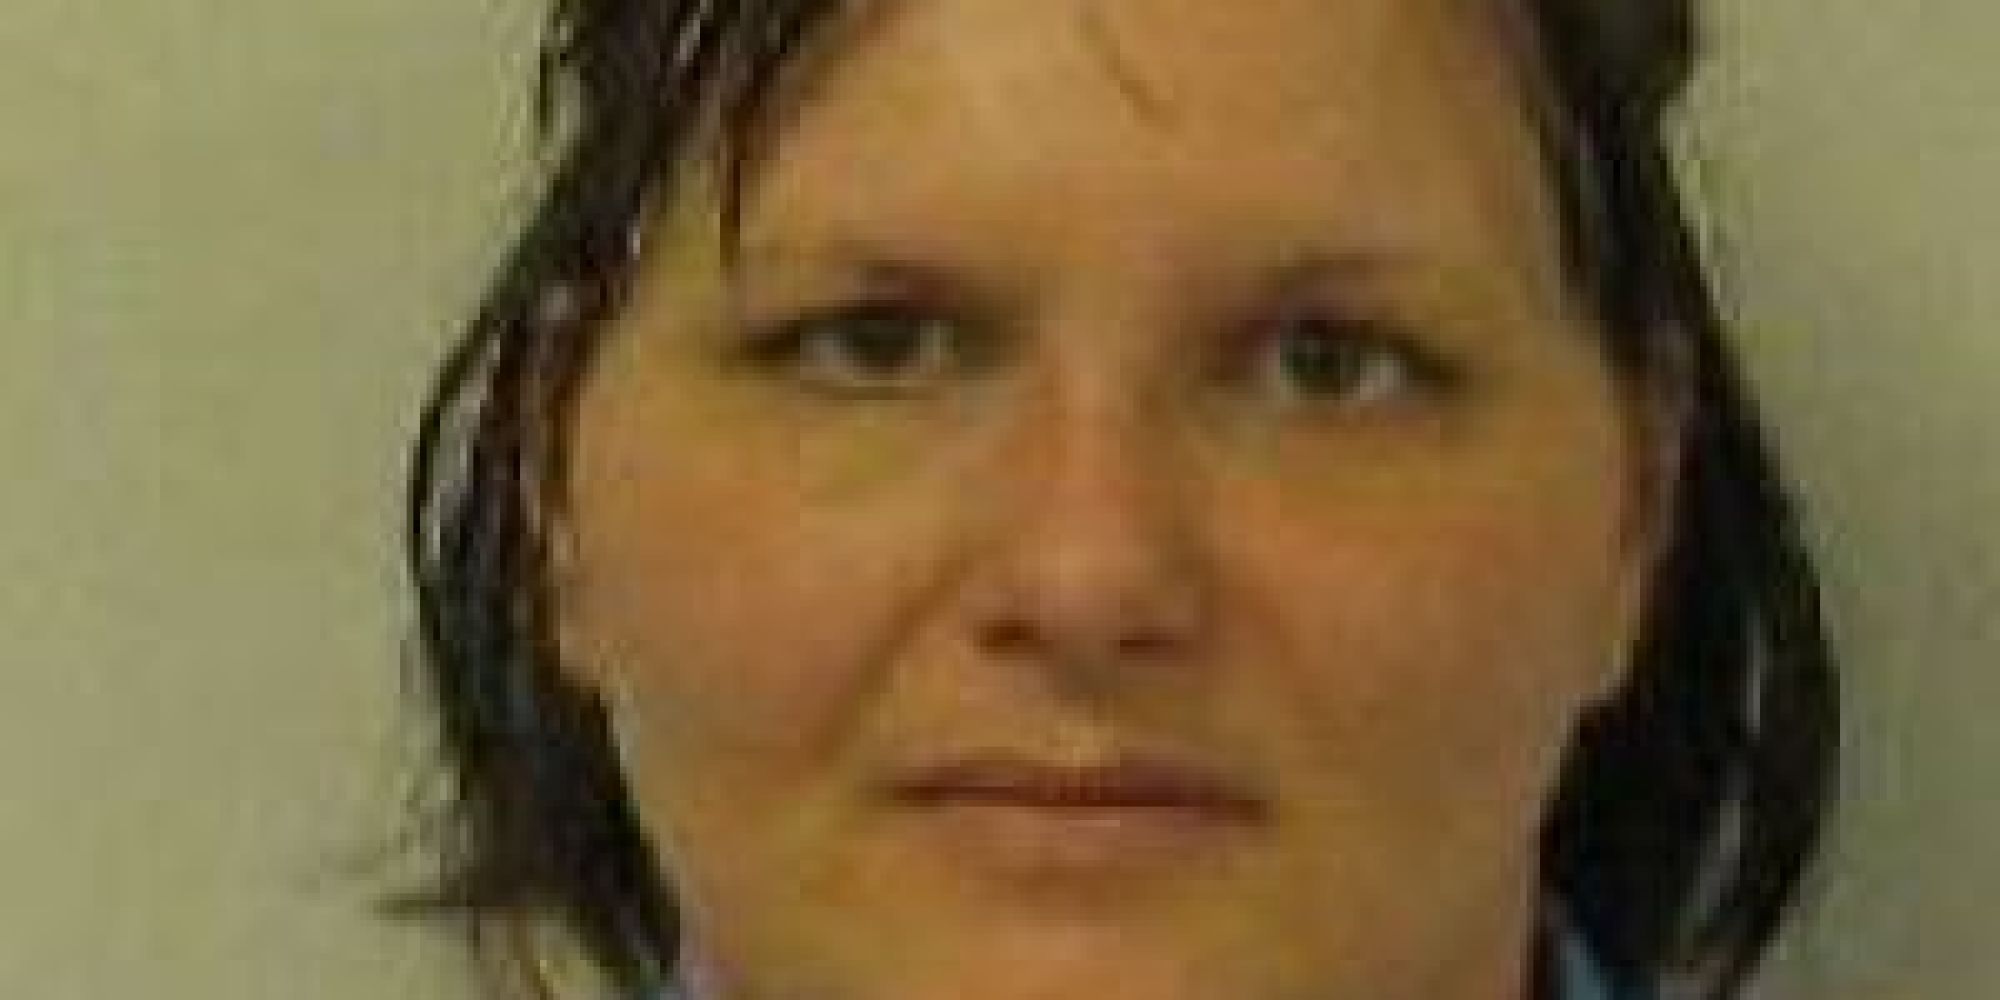 Tonya Michelle Farnsworth Woman Who Charged Pastor 200 For Sex Acts Pleads Guilty To